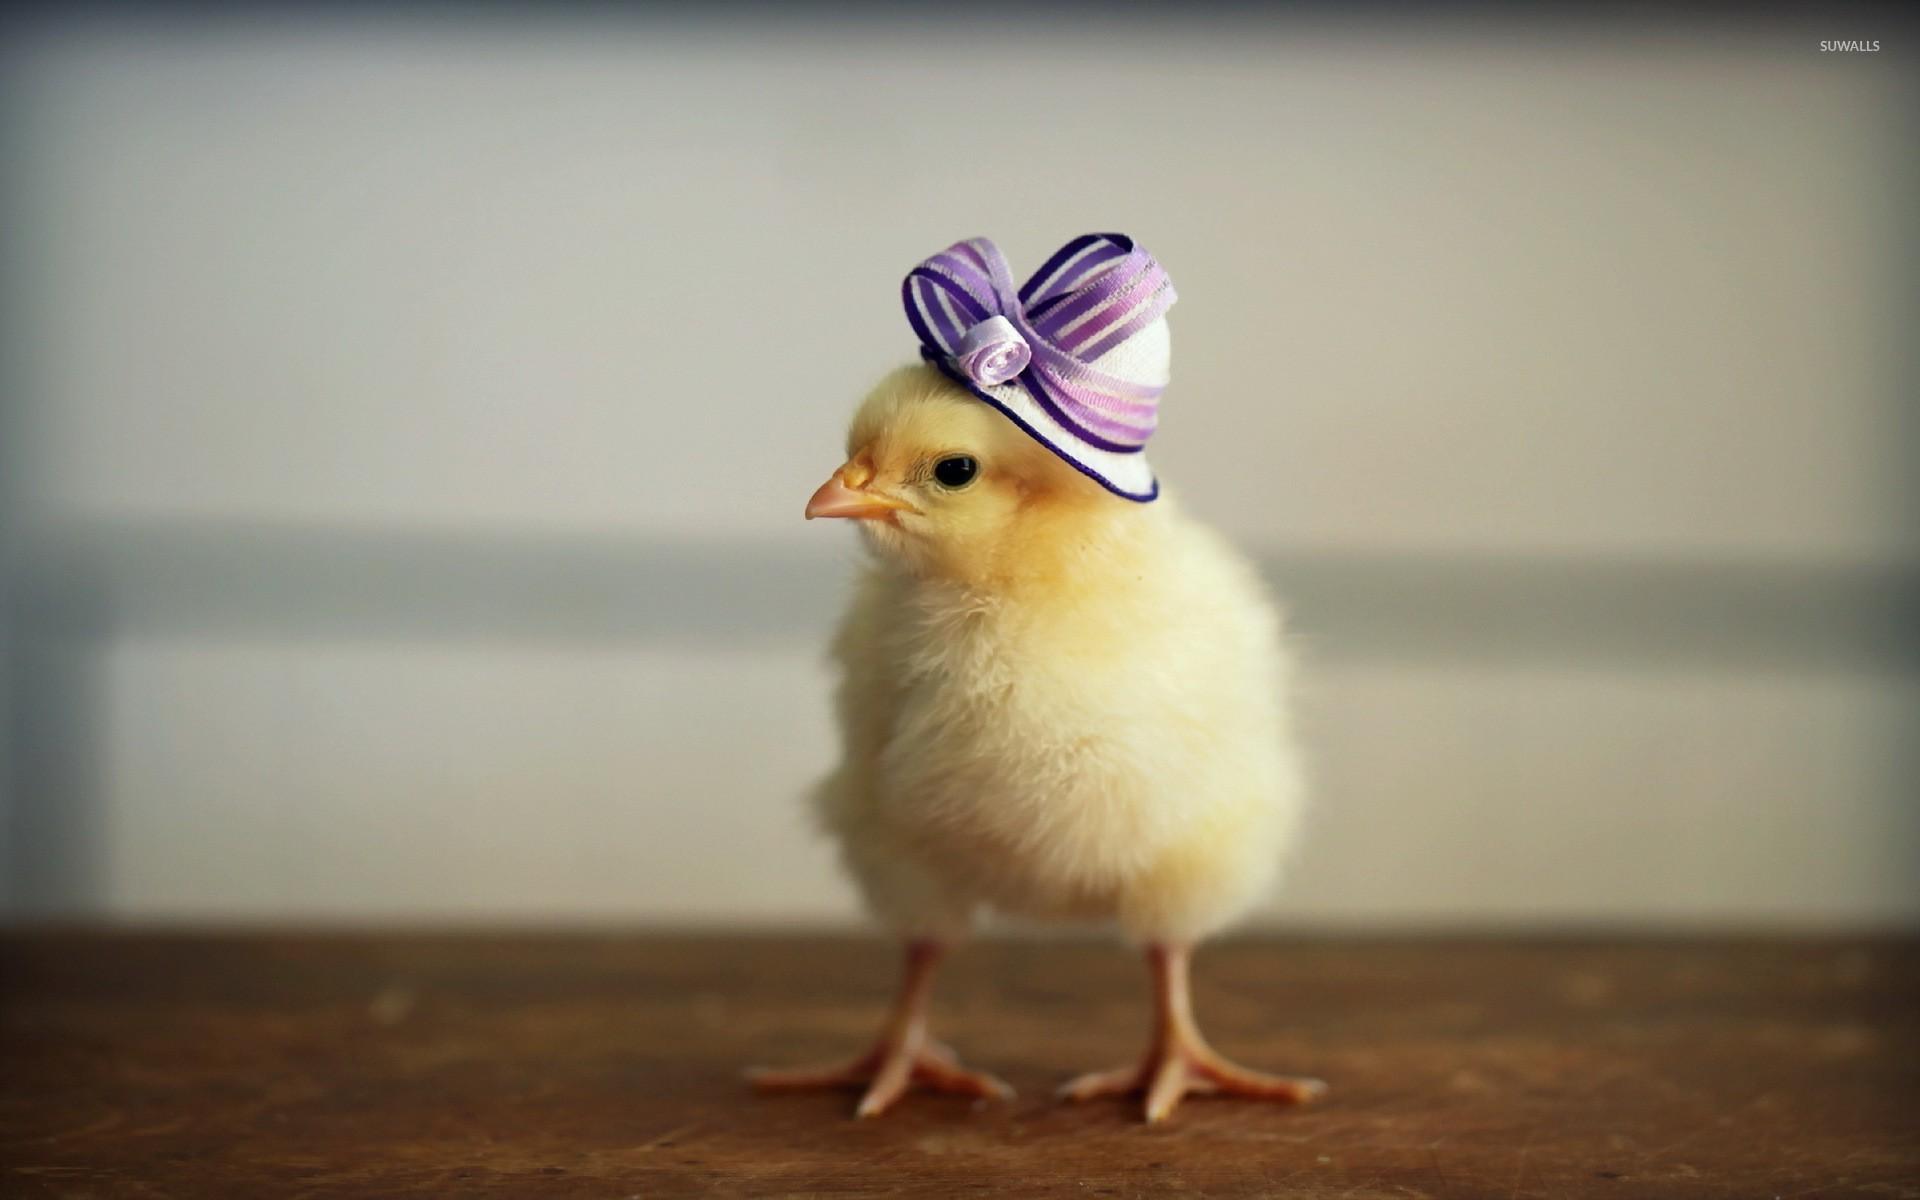 Chick with a purple hat wallpaper wallpaper